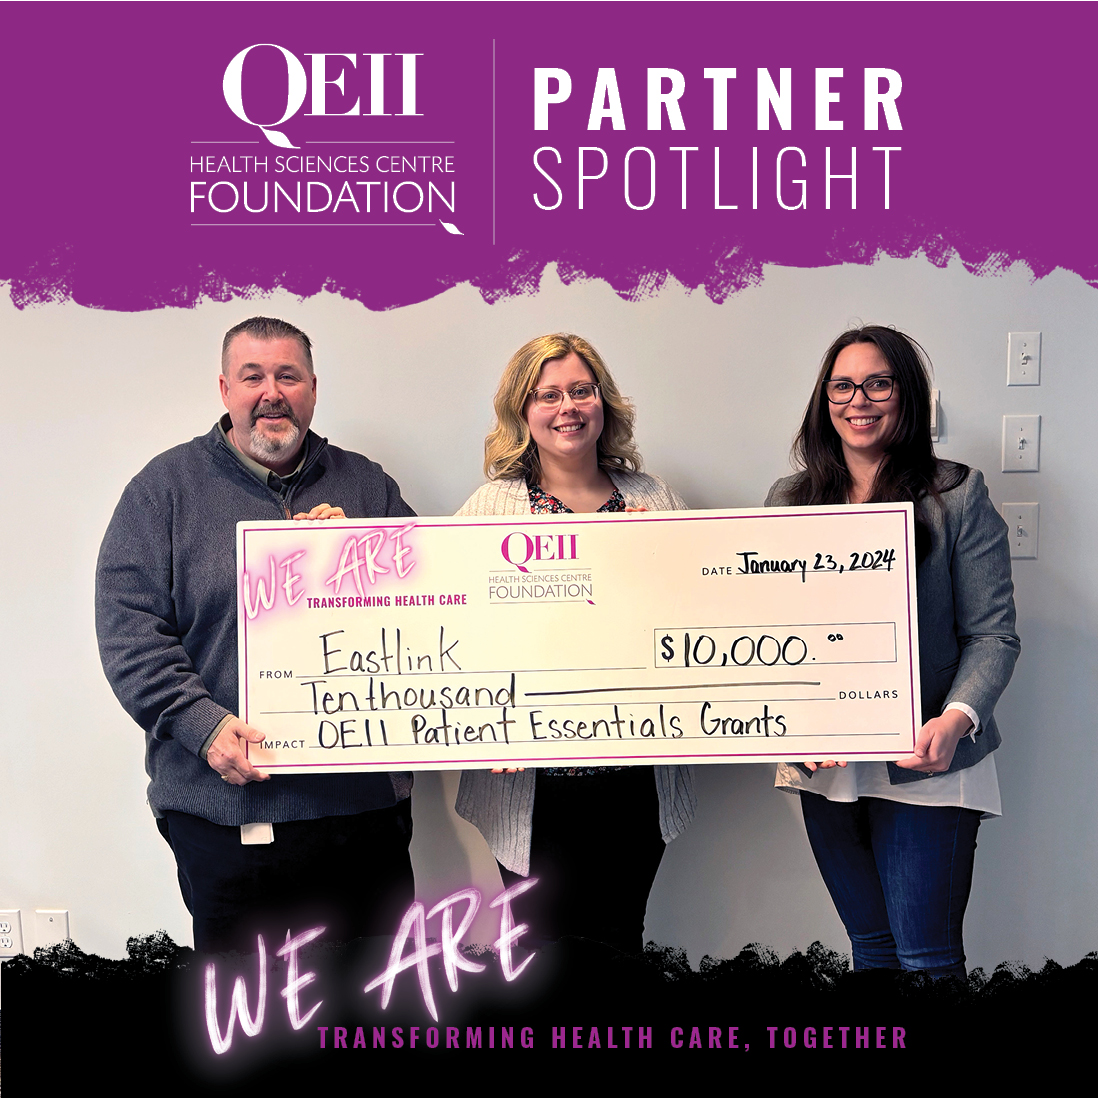 We're extending a heartfelt THANK YOU to our partner, @Eastlink for their $10,000 donation to our QEII Patient Essentials Fund! This support allows QEII healthcare providers to assist patients and families in need with essentials during their care journey. 💜